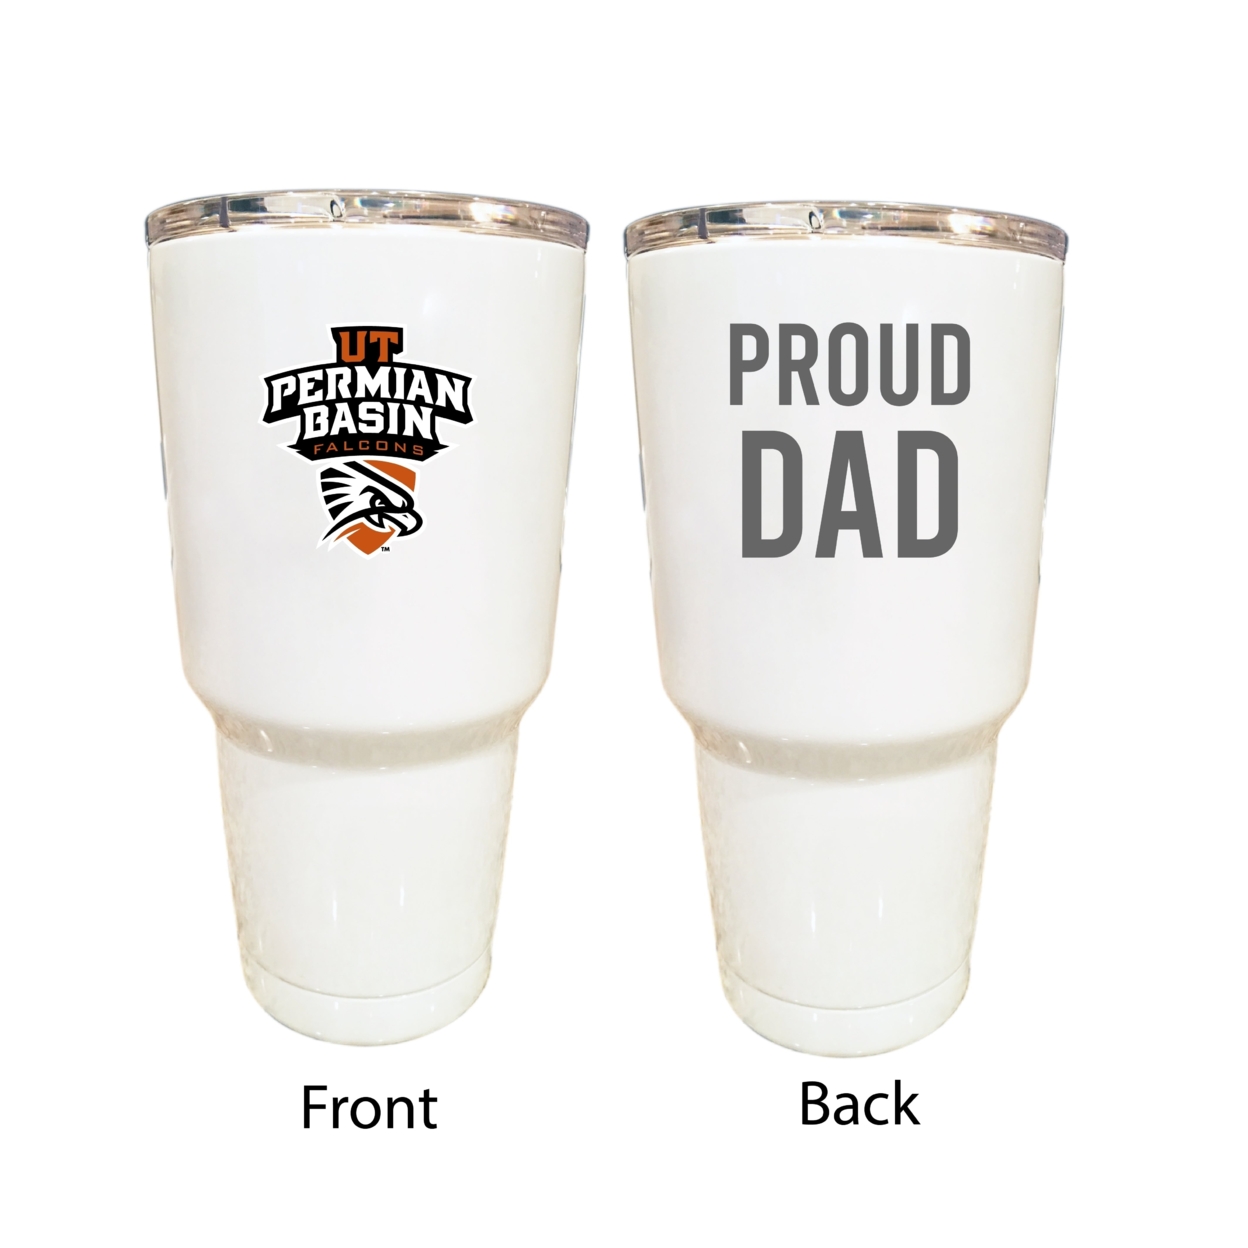 University Of Texas Of The Permian Basin Proud Dad 24 Oz Insulated Stainless Steel Tumblers Choose Your Color. - White